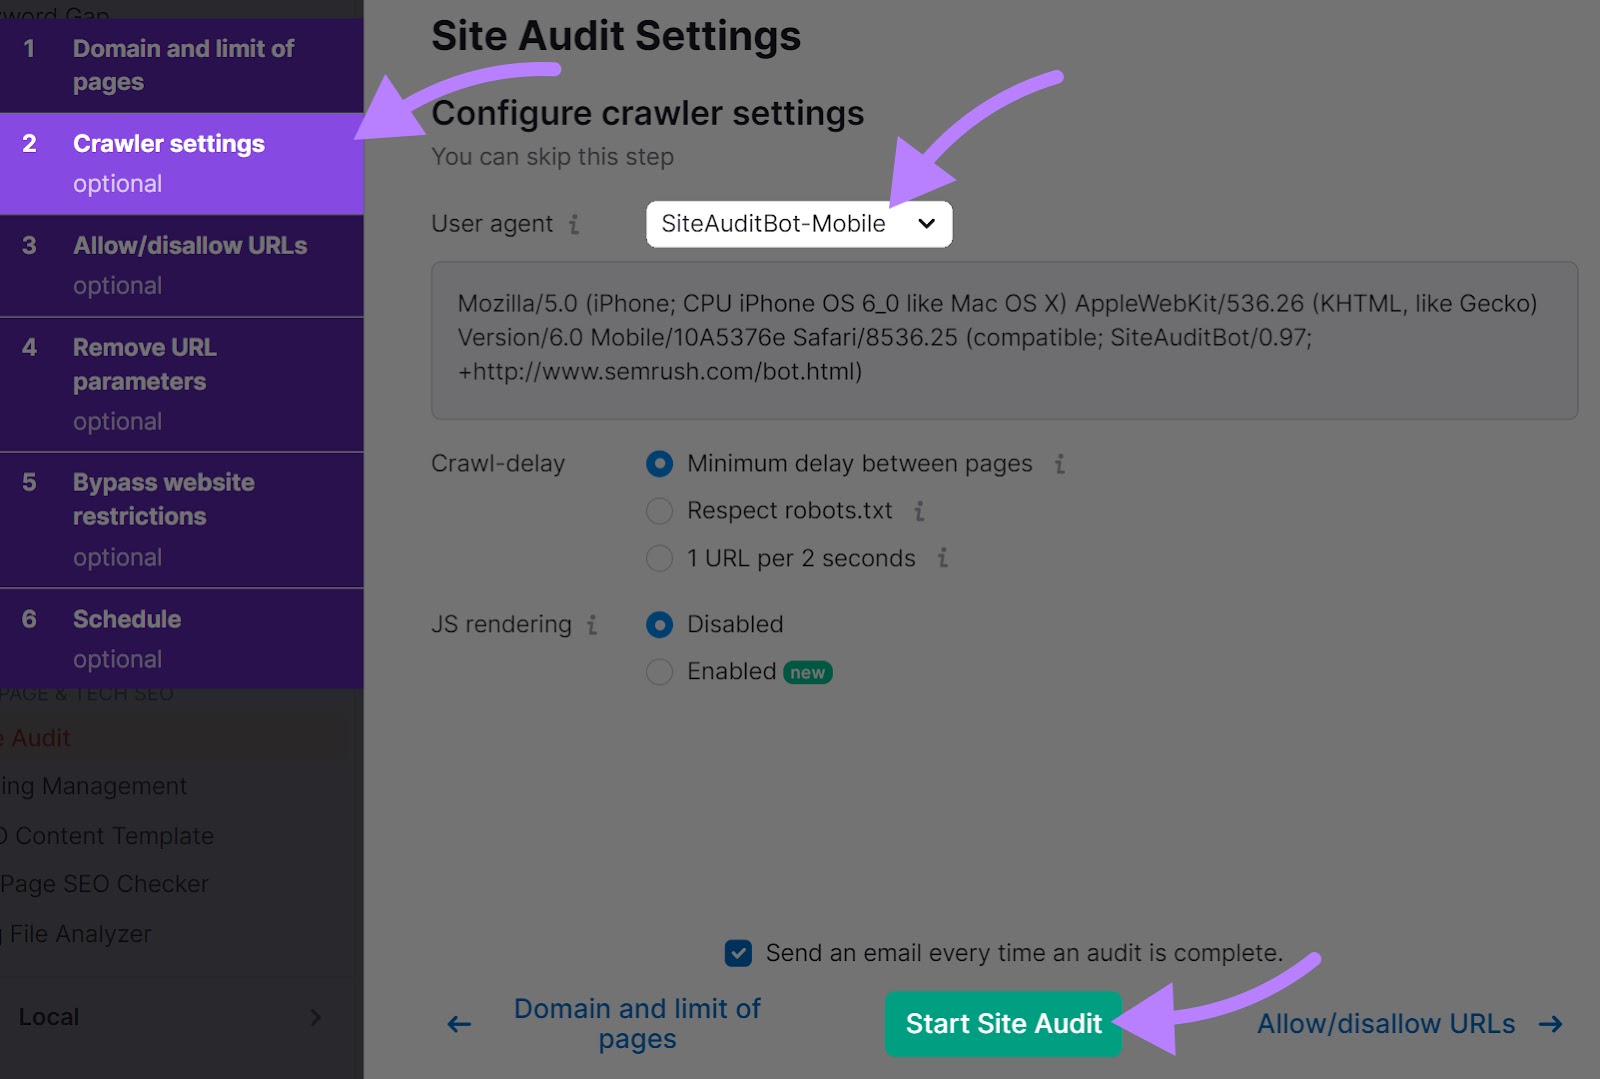 “SiteAuditBot-Mobile” selected under Site Audit's crawler settings